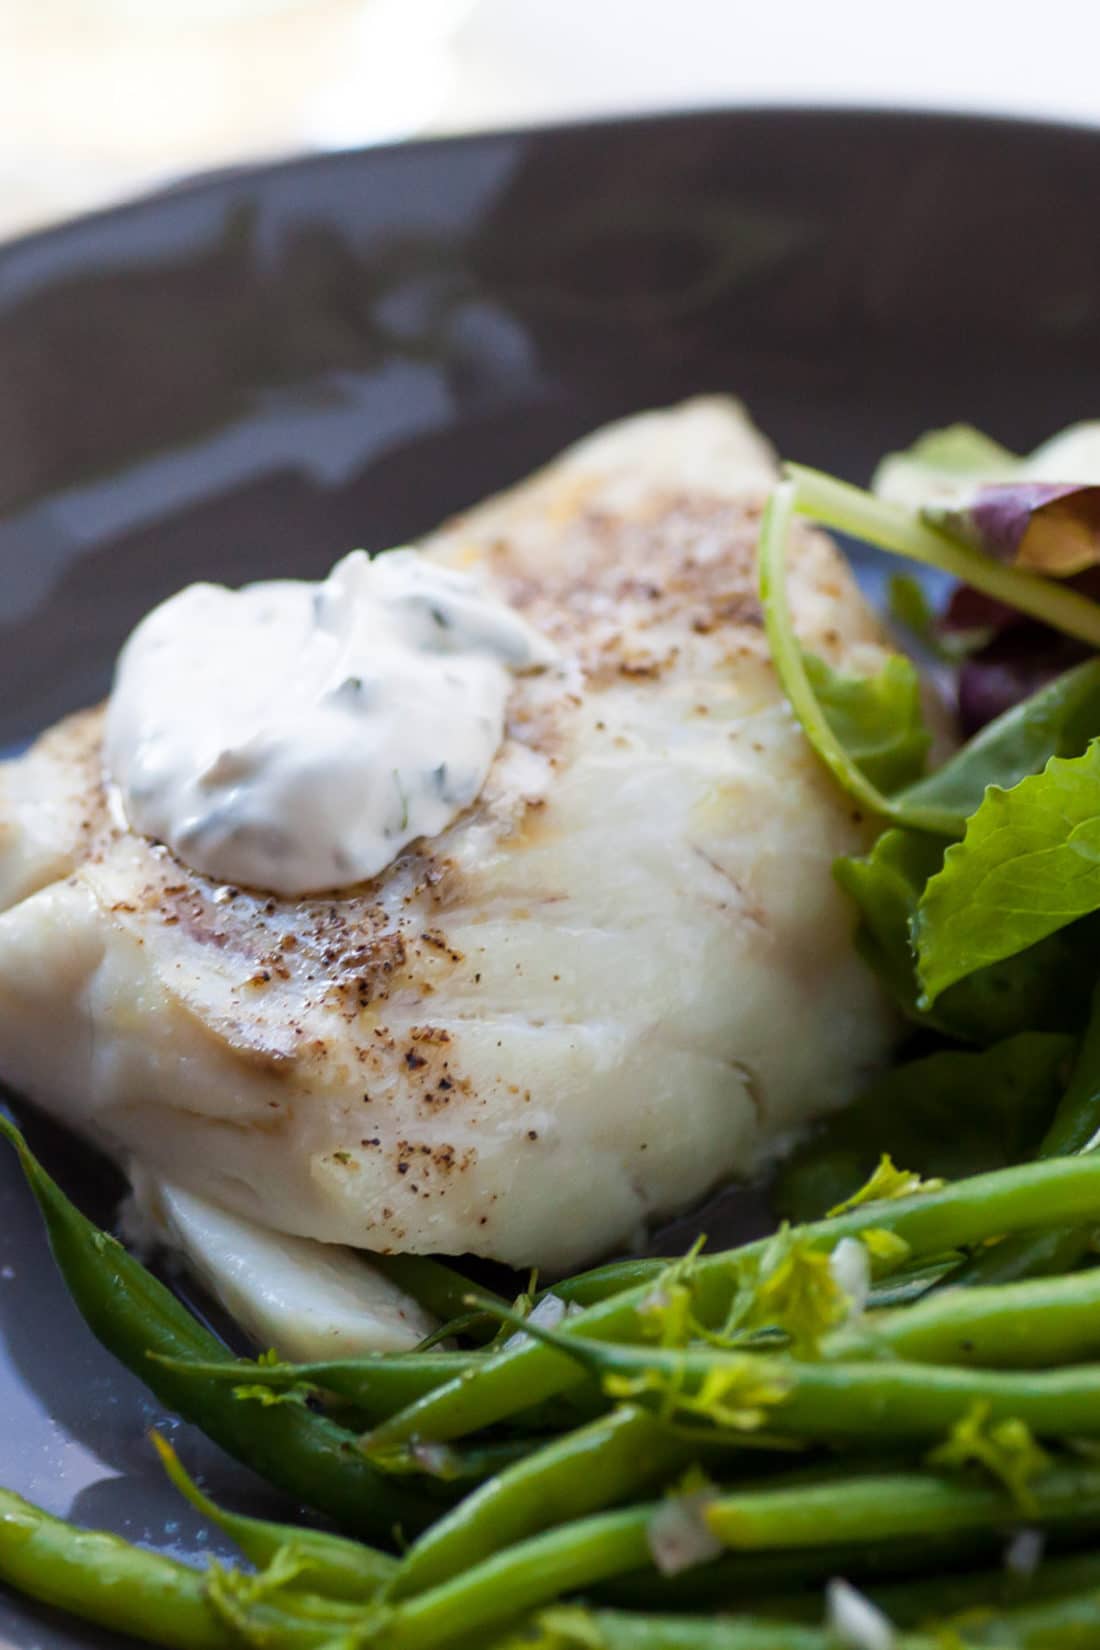 Dollop of fresh herb sauce on Cod.